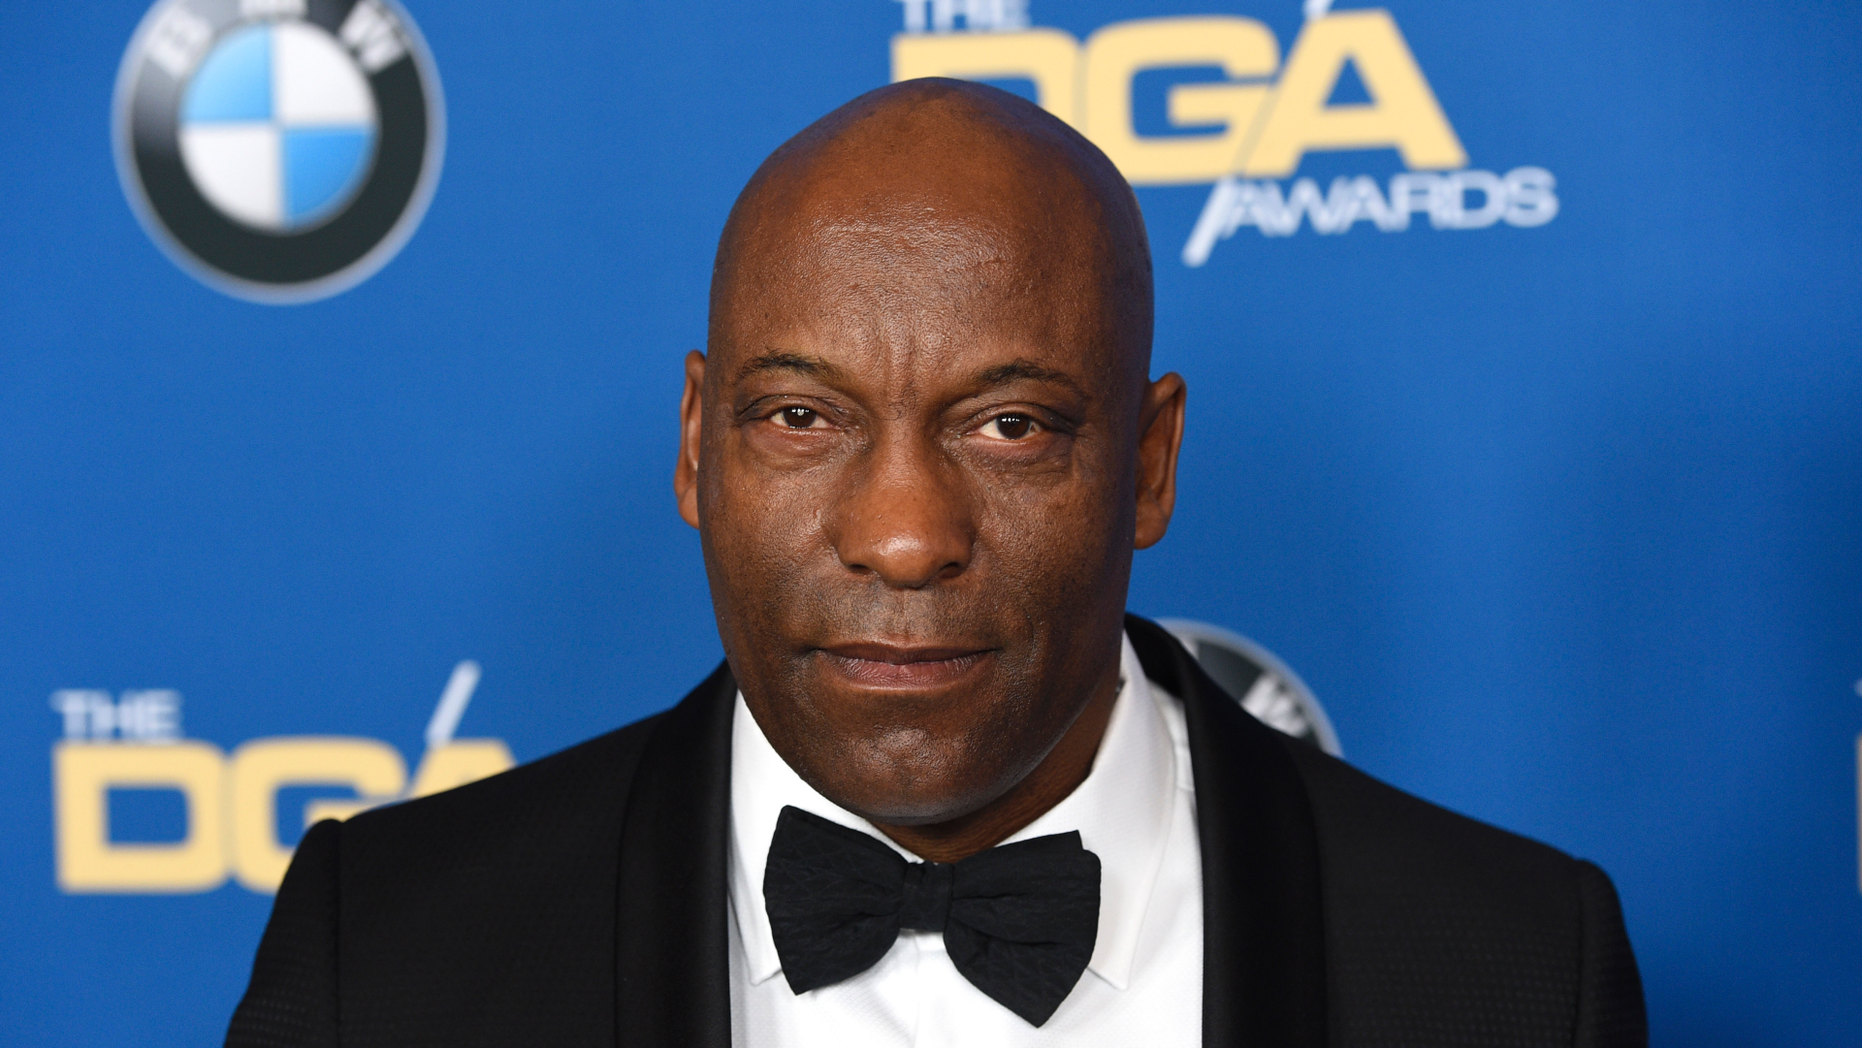 FILE - In this Feb. 3, 2018 file photo, John Singleton arrives at the 70th annual Directors Guild of America Awards in Beverly Hills, Calif. (Photo by Chris Pizzello/Invision/AP)